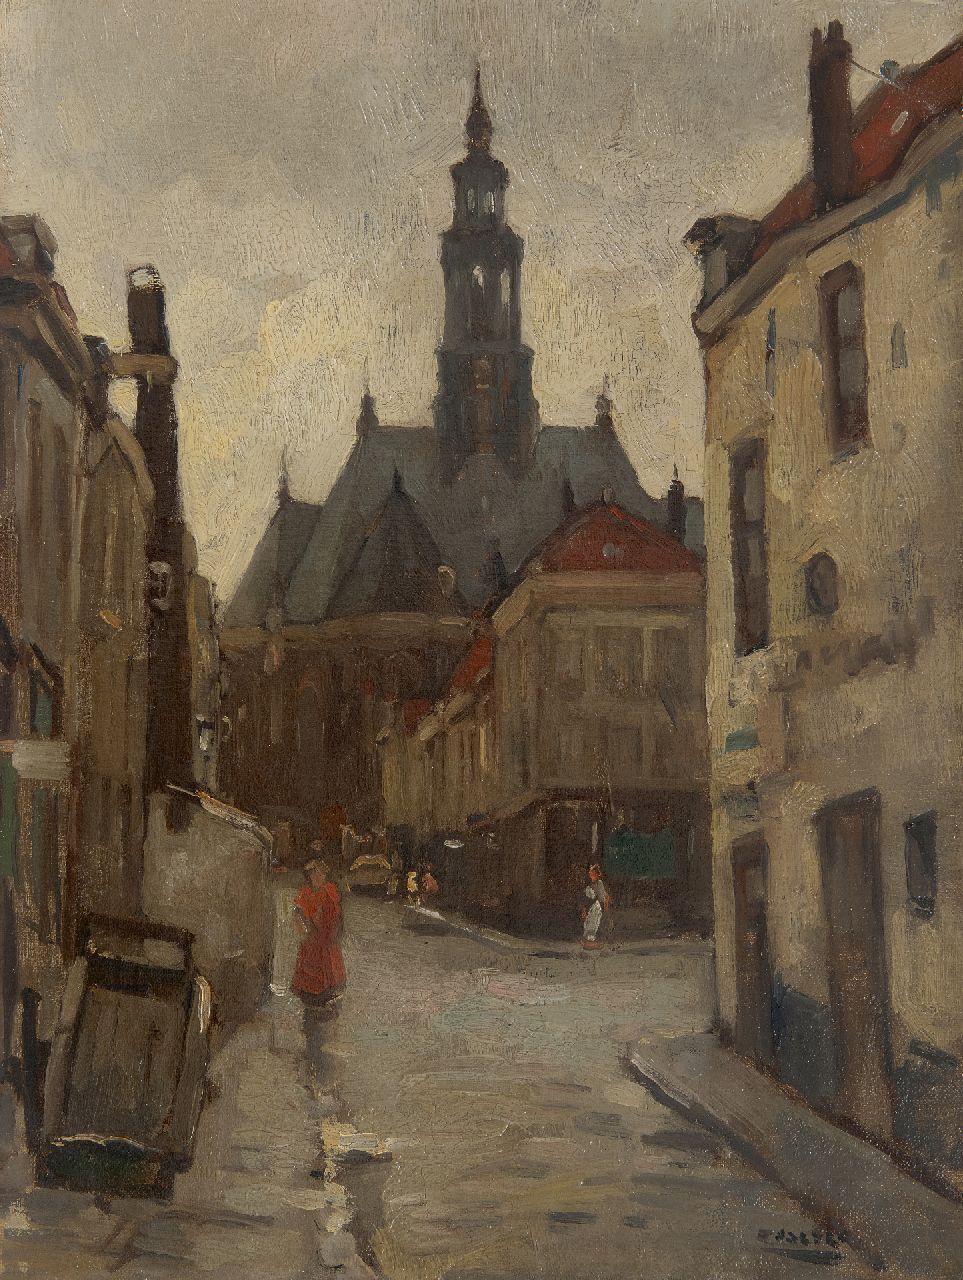 Noltee B.C.  | Bernardus Cornelis 'Cor' Noltee | Paintings offered for sale | View of The Hague, with the Nieuwe Kerk beyond, oil on canvas 40.0 x 30.3 cm, signed l.r.